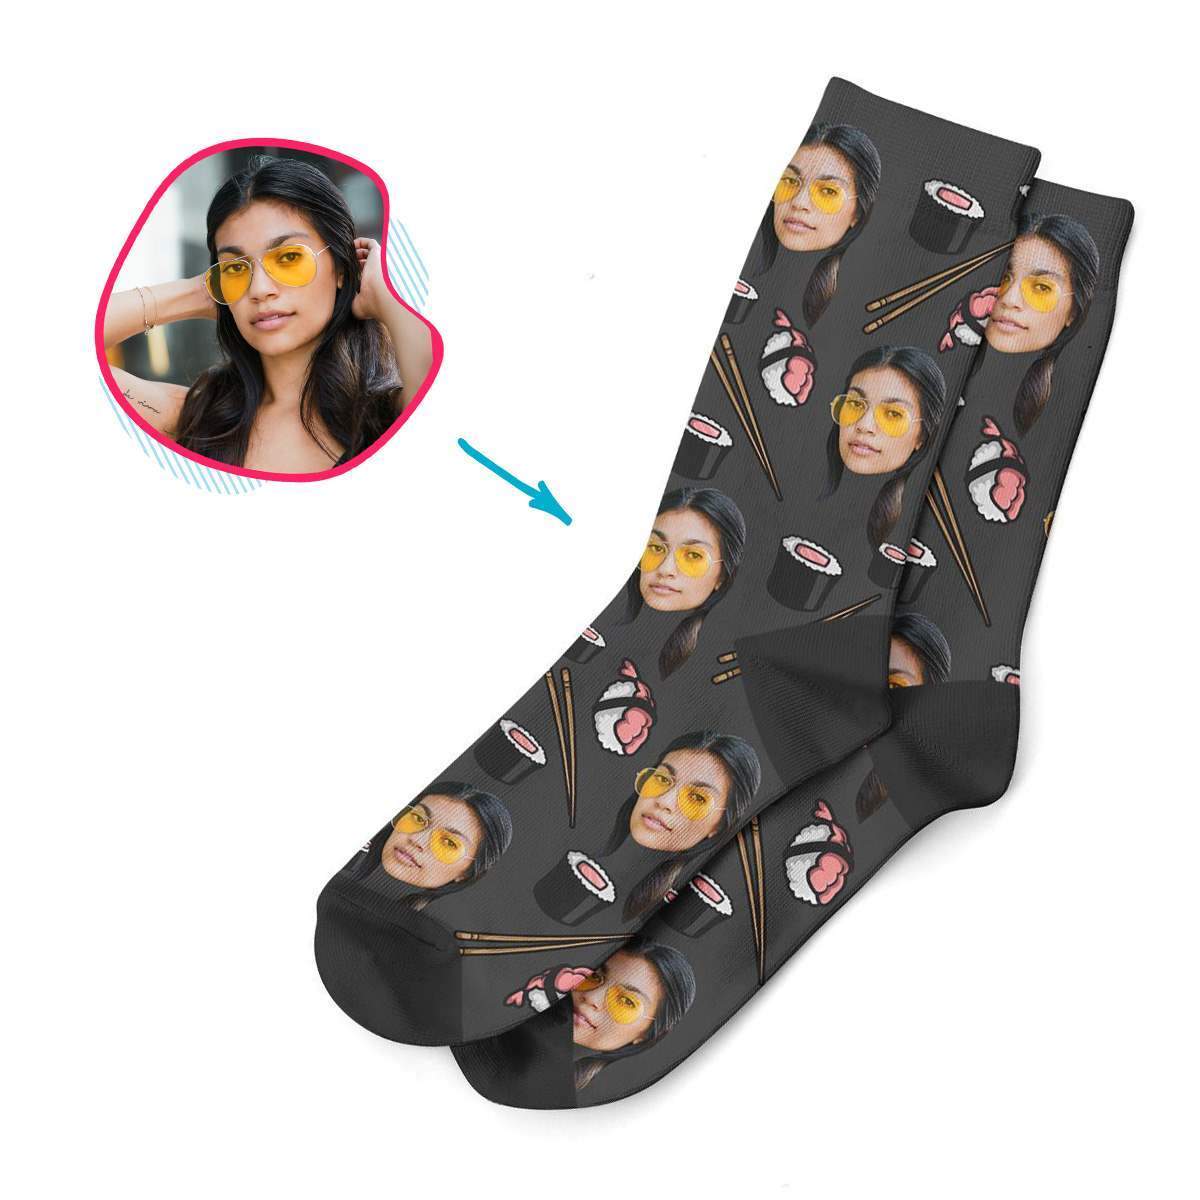 dark Sushi socks personalized with photo of face printed on them